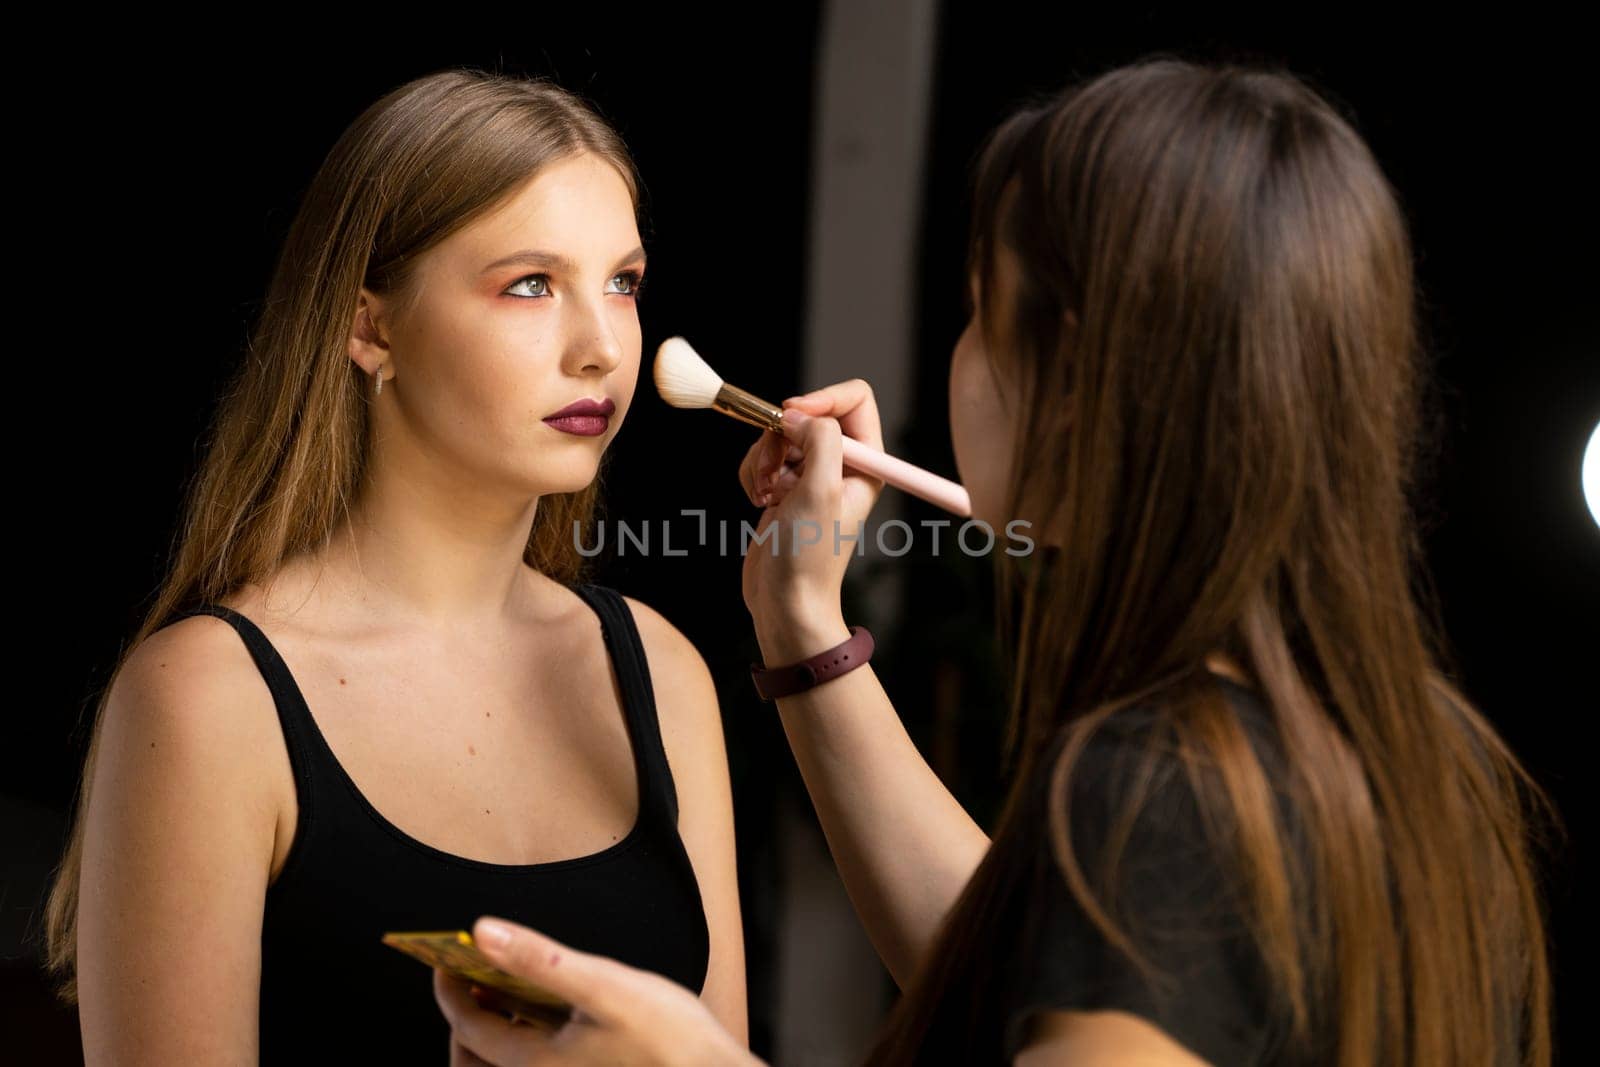 Process of making makeup. Make-up artist working with brush on model face. Portrait of young blonde woman in beauty saloon interior. Applying tone to skin